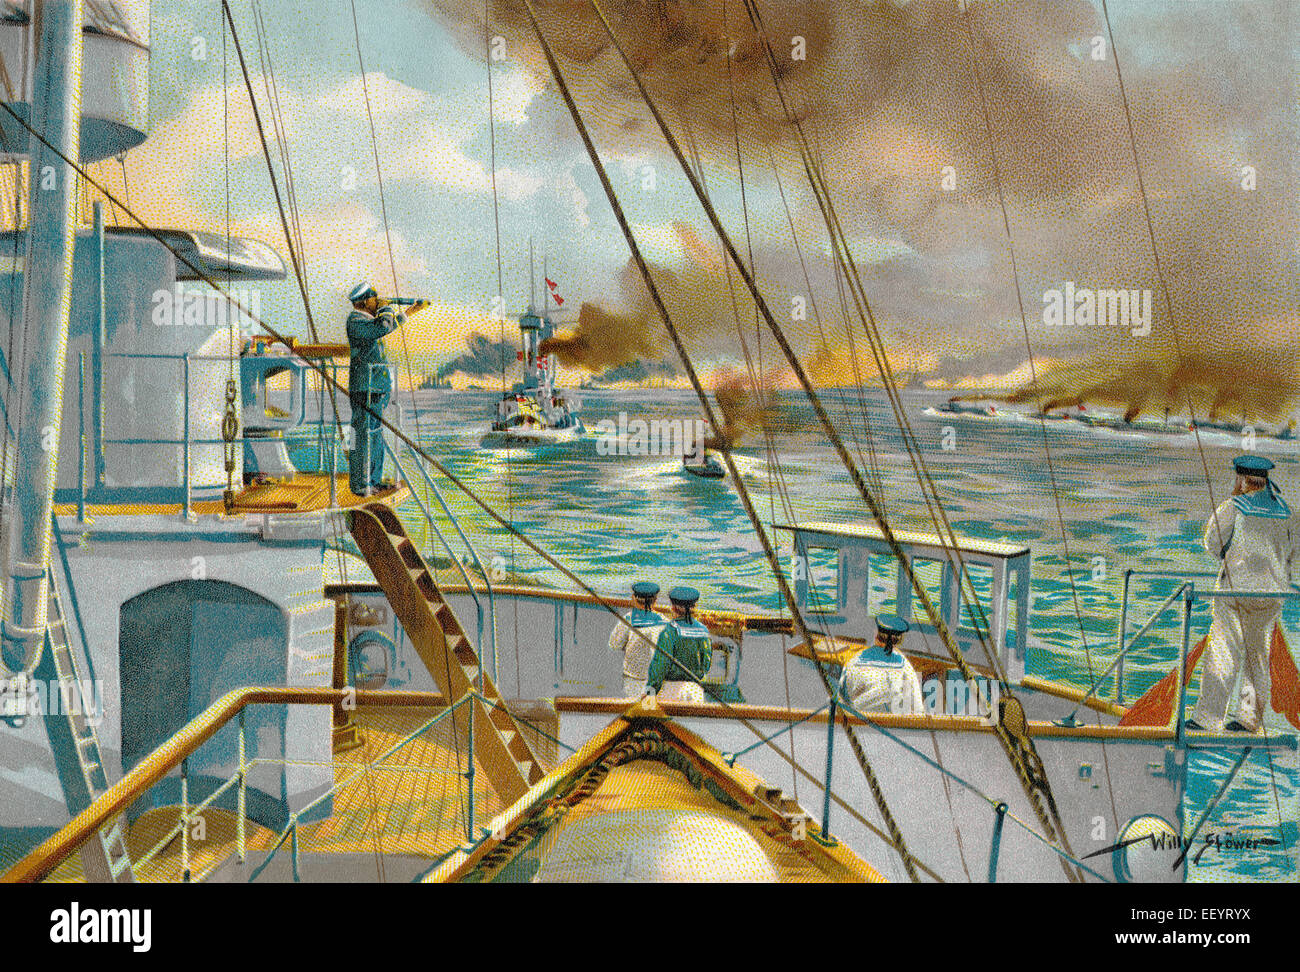 The bridge of a ship of the line, c. 1900, Stock Photo